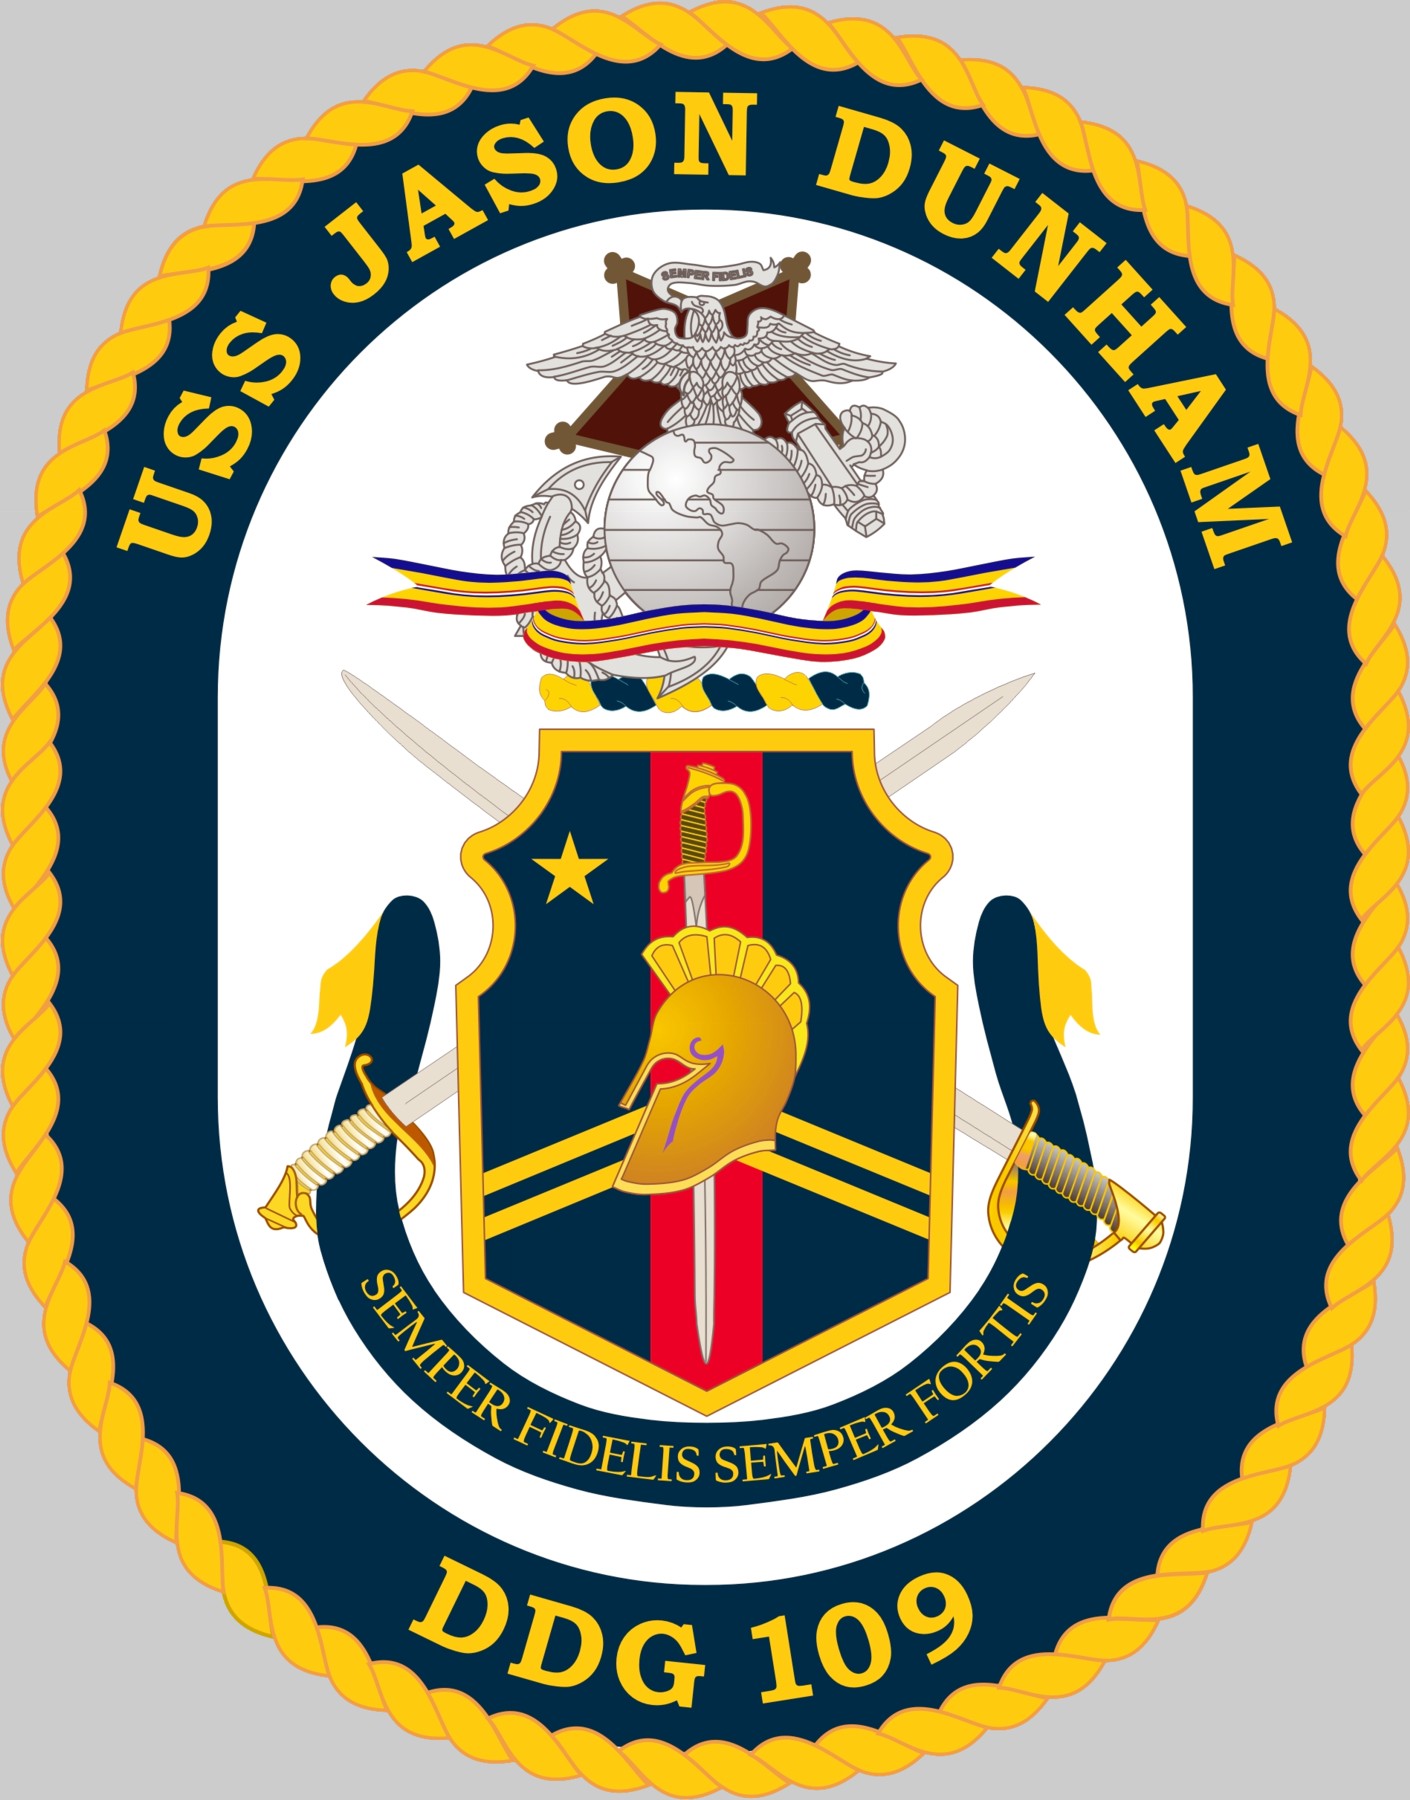 ddg-109 uss jason dunham crest insignia patch badge arleigh burke class guided missile destroyer aegis us navy 02x